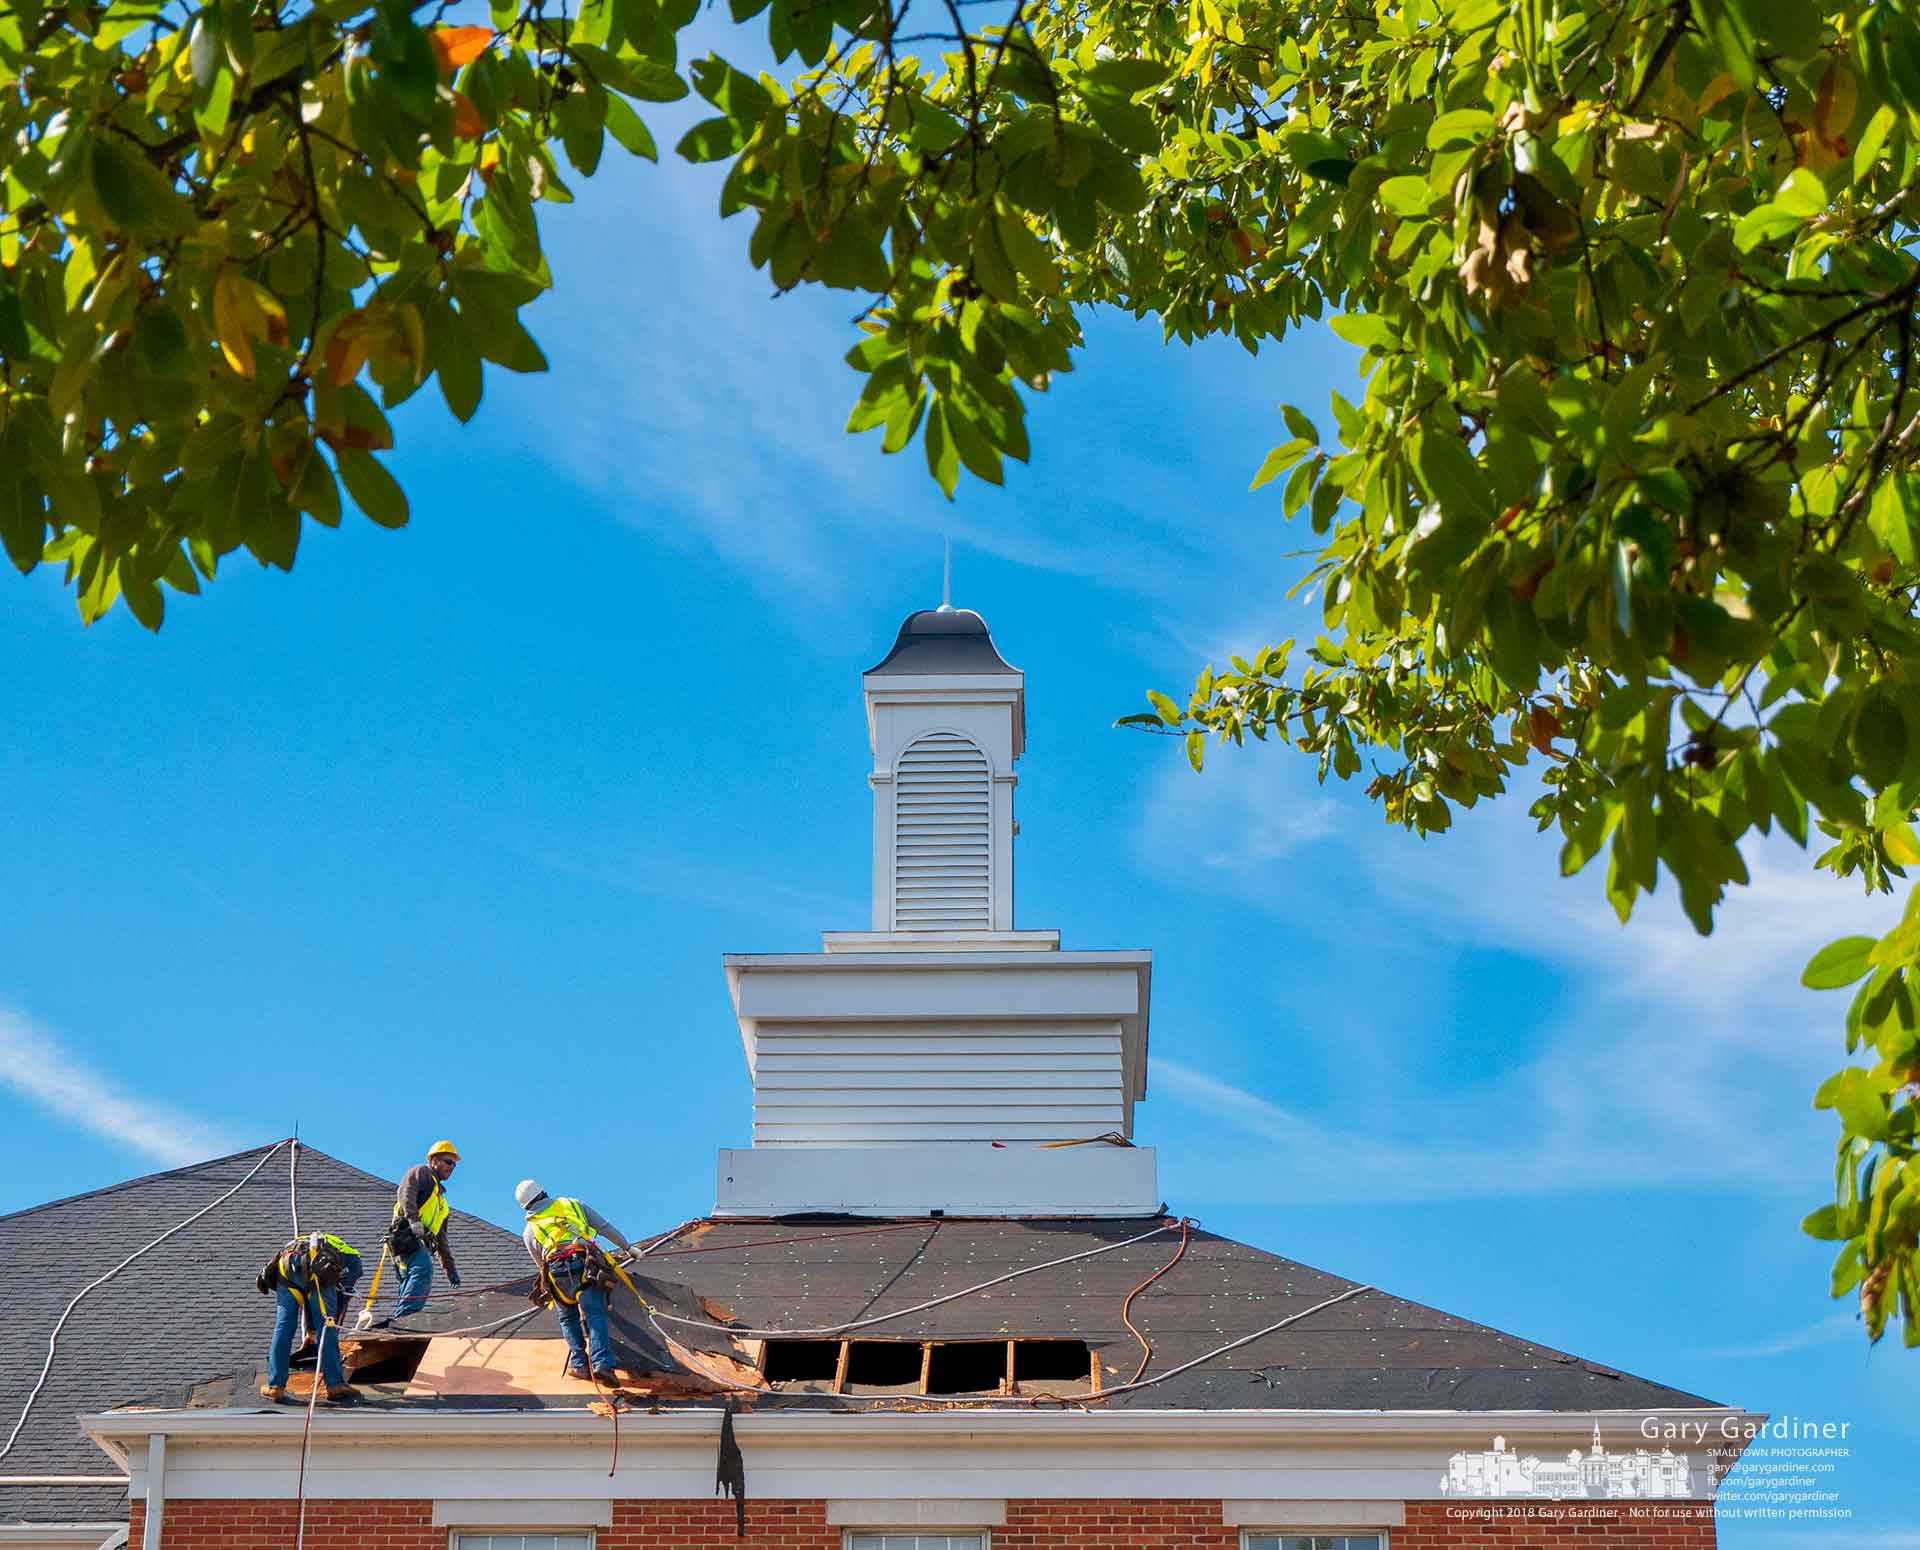 A roofing work crew replaces rotting plywood on the roof of the police department building before replacing the shingles in the second part of a multi-year project to upgrade the building. My Final Photo for Oct. 22, 2018.